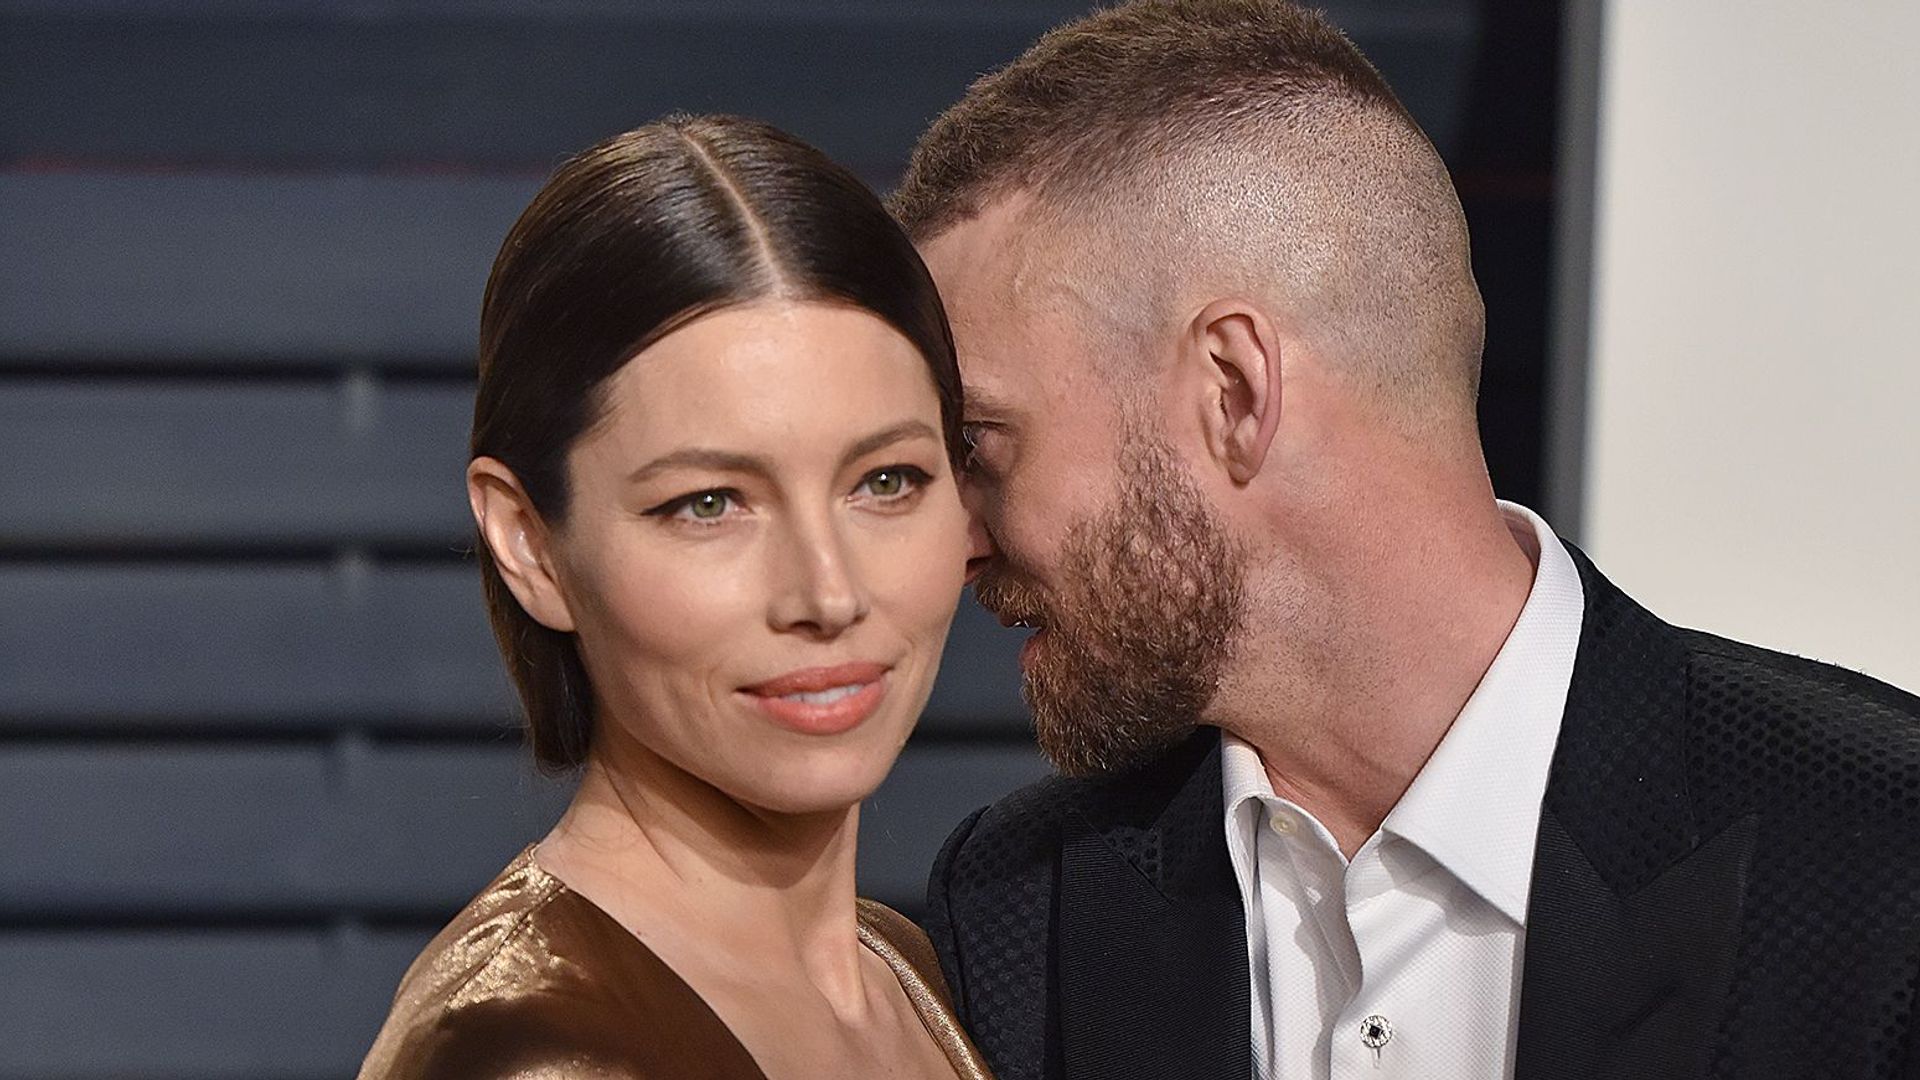 Justin Timberlake whispering to Jessica Biel on the red carpet